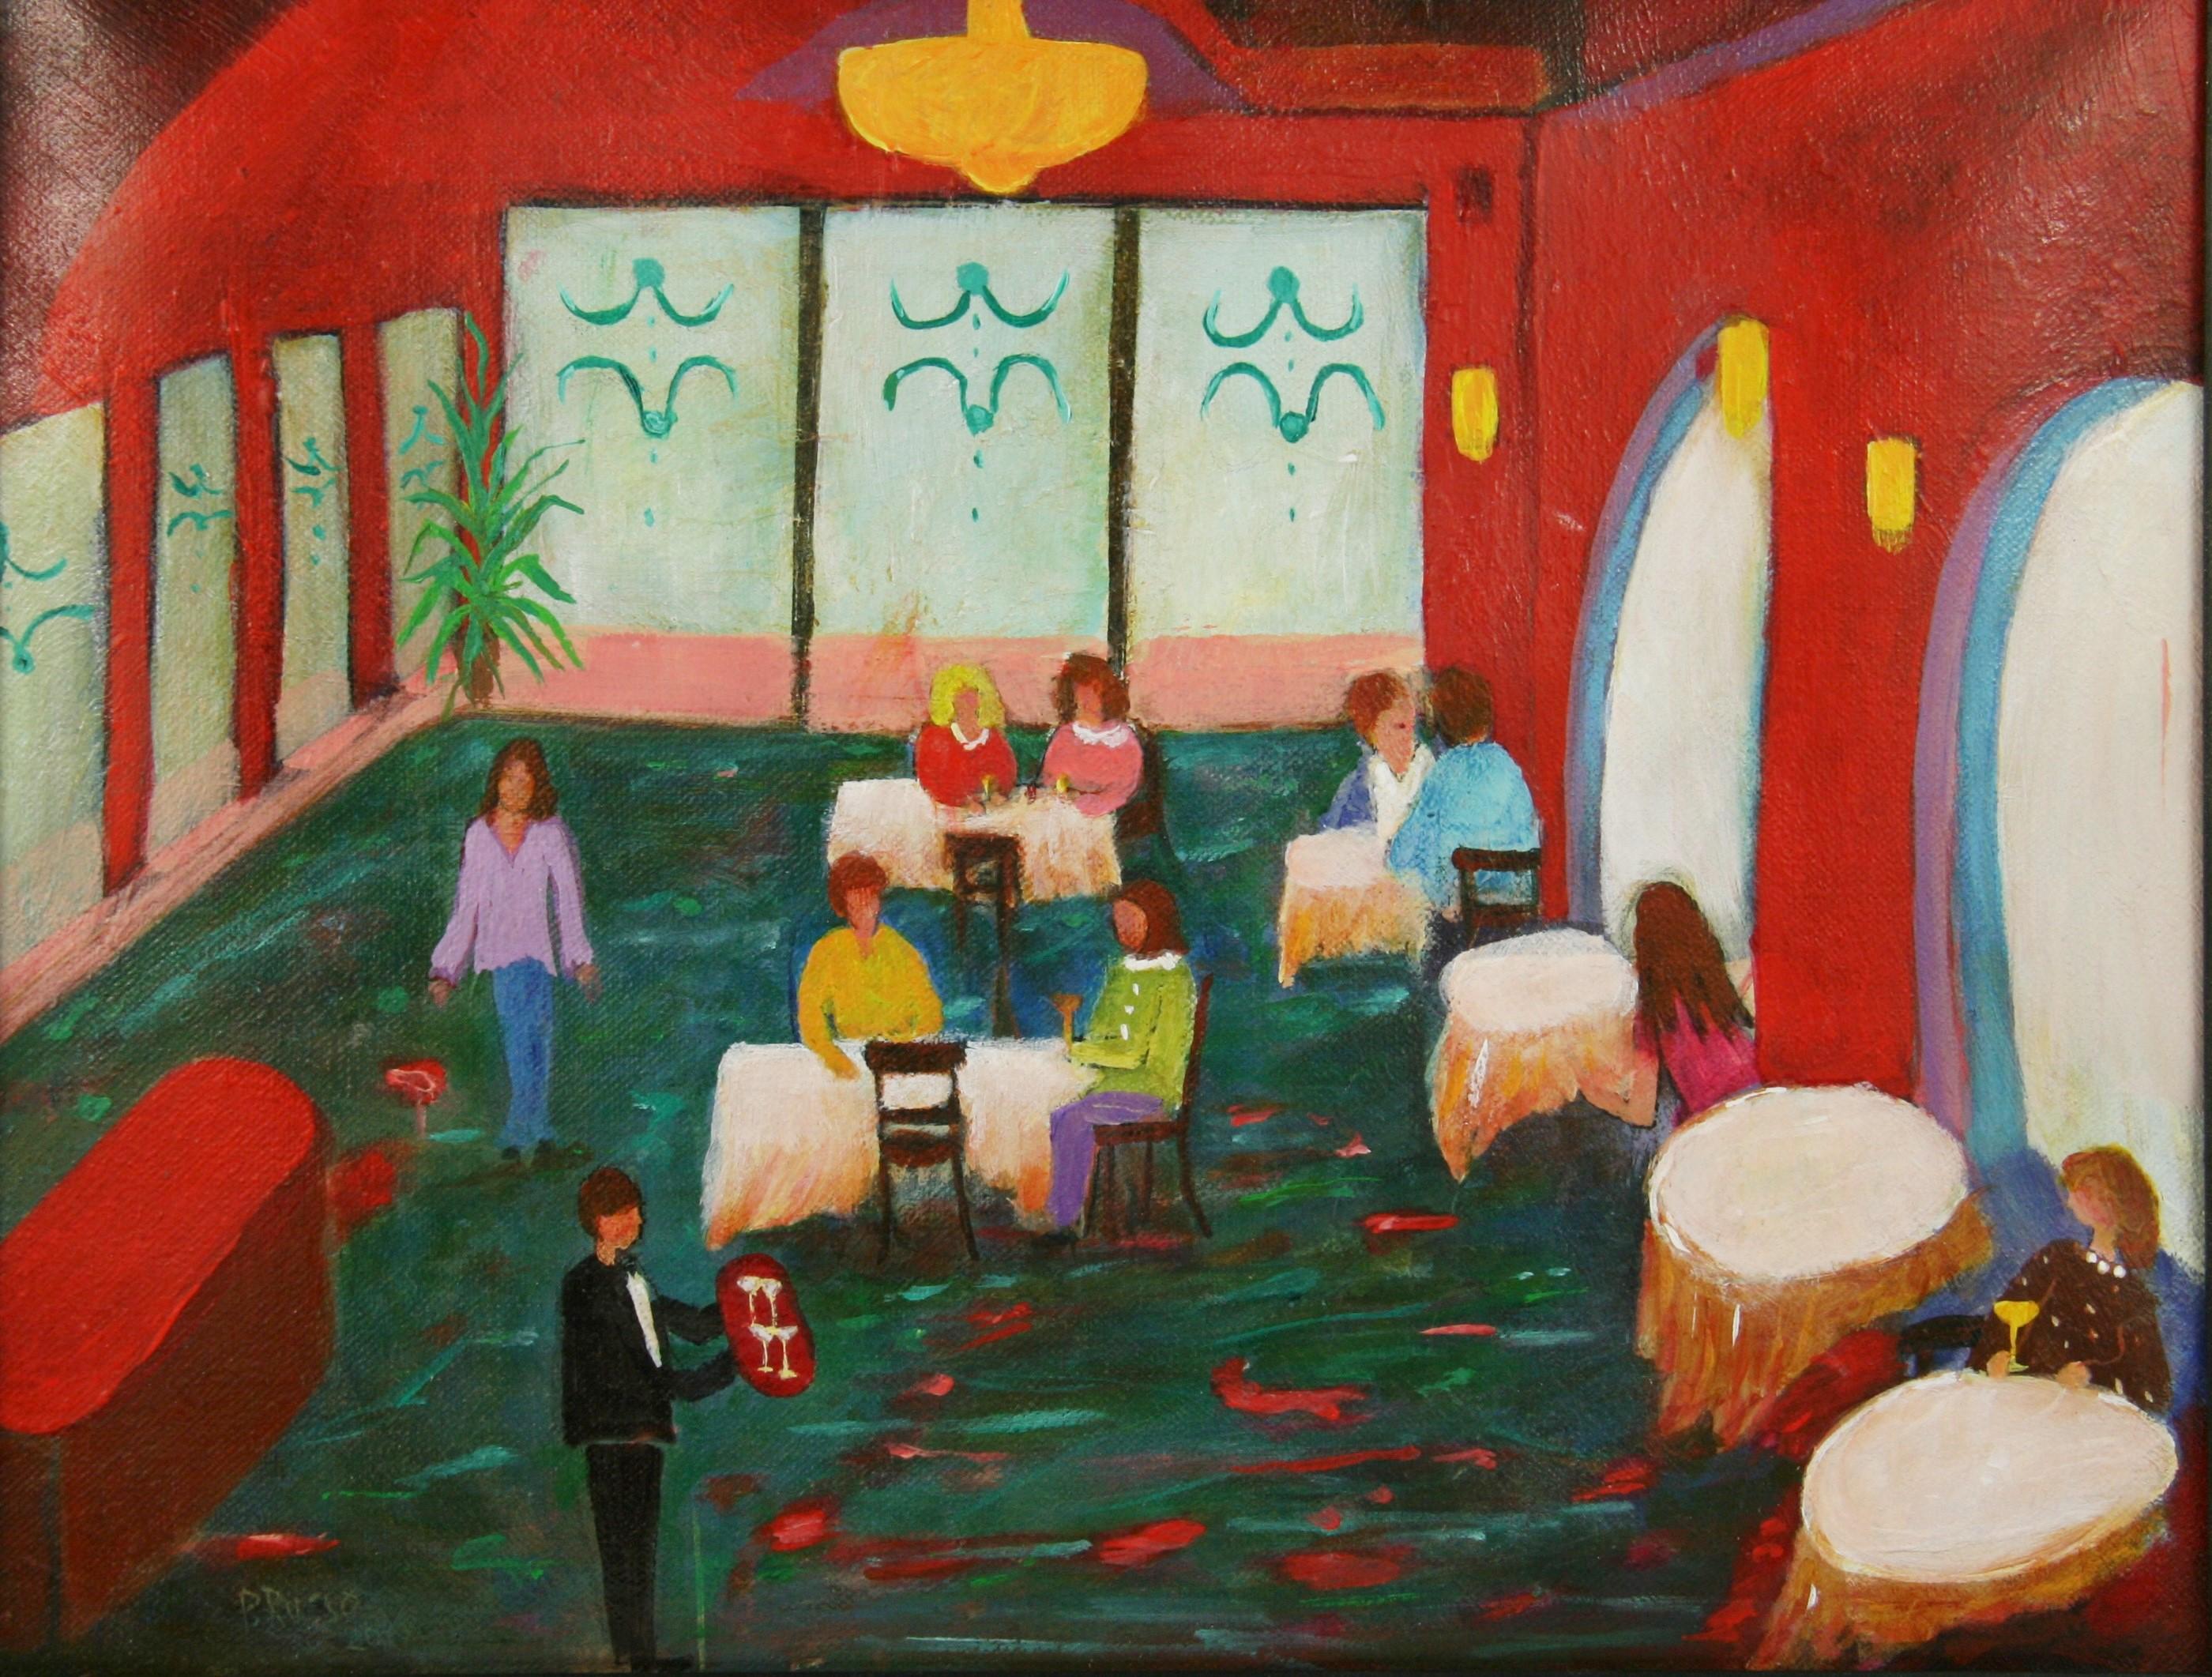 Unknown Interior Painting - Italian Naive Colorful  Dining Out Interior Scene Painting By P.Russo